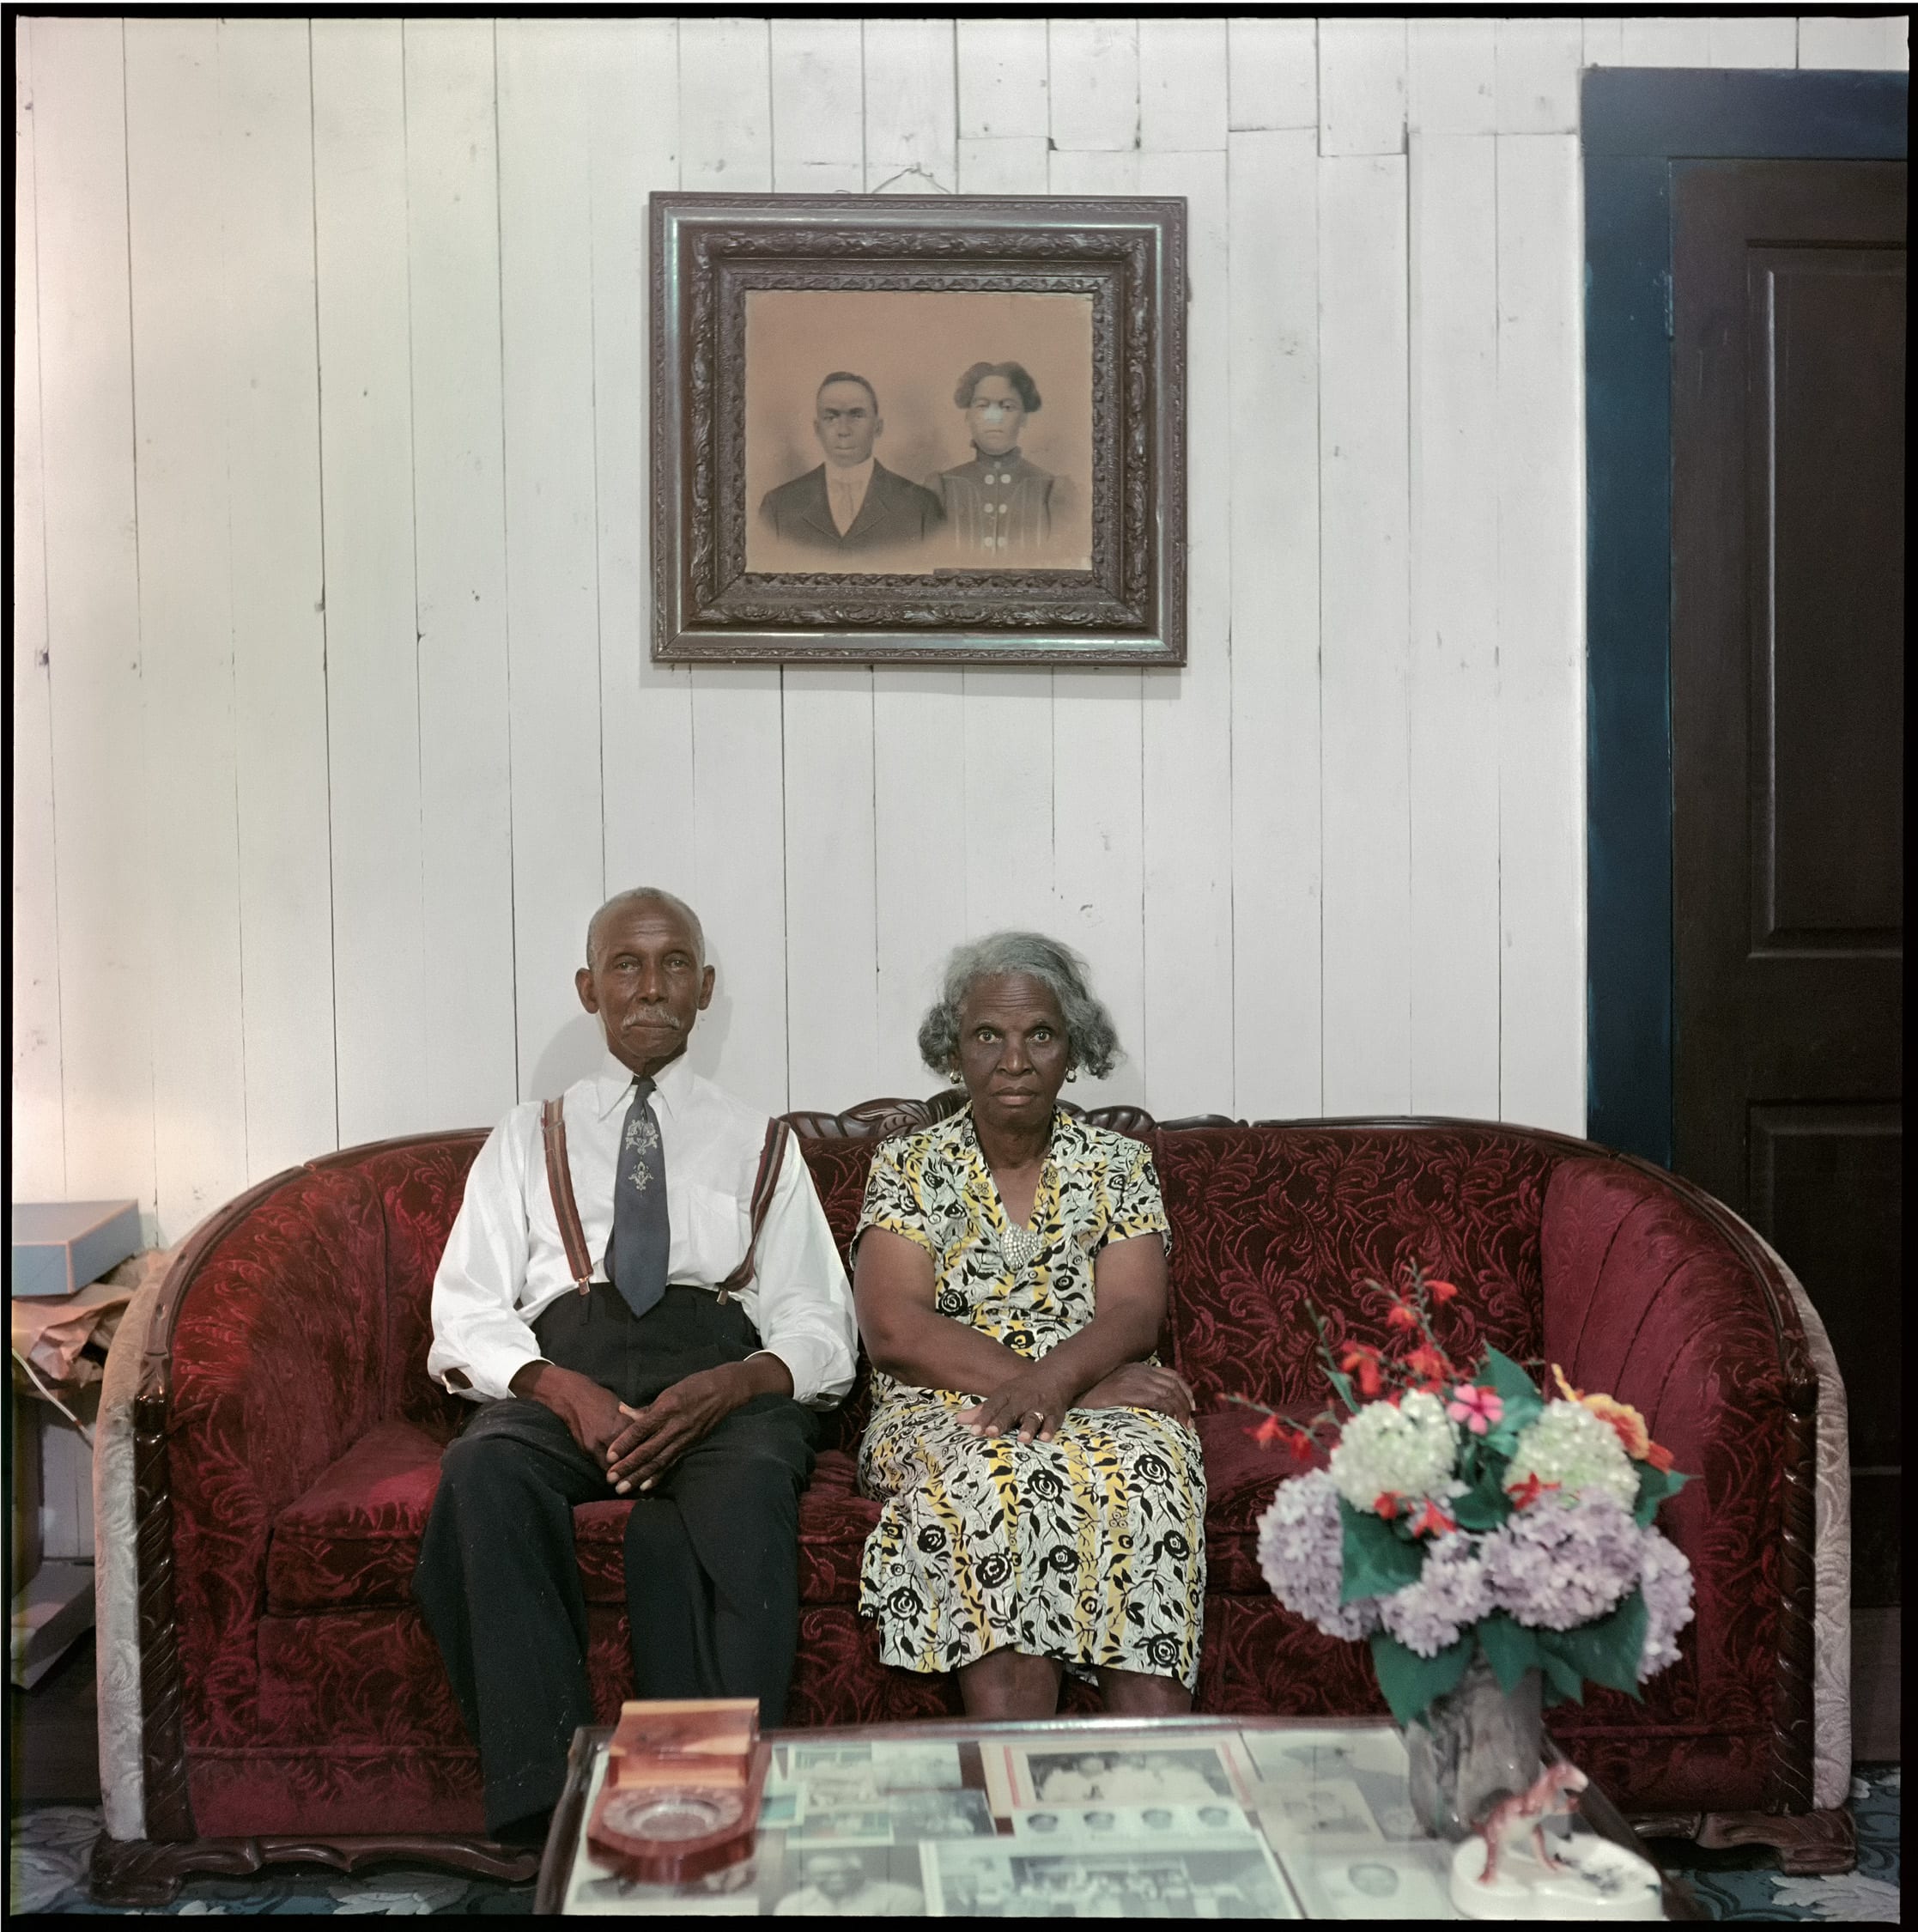 Gordon Parks (American, 1912–2006), Mr. and Mrs. Albert Thornton, Mobile, Alabama, 1956, courtesy of and copyright The Gordon Parks Foundation.